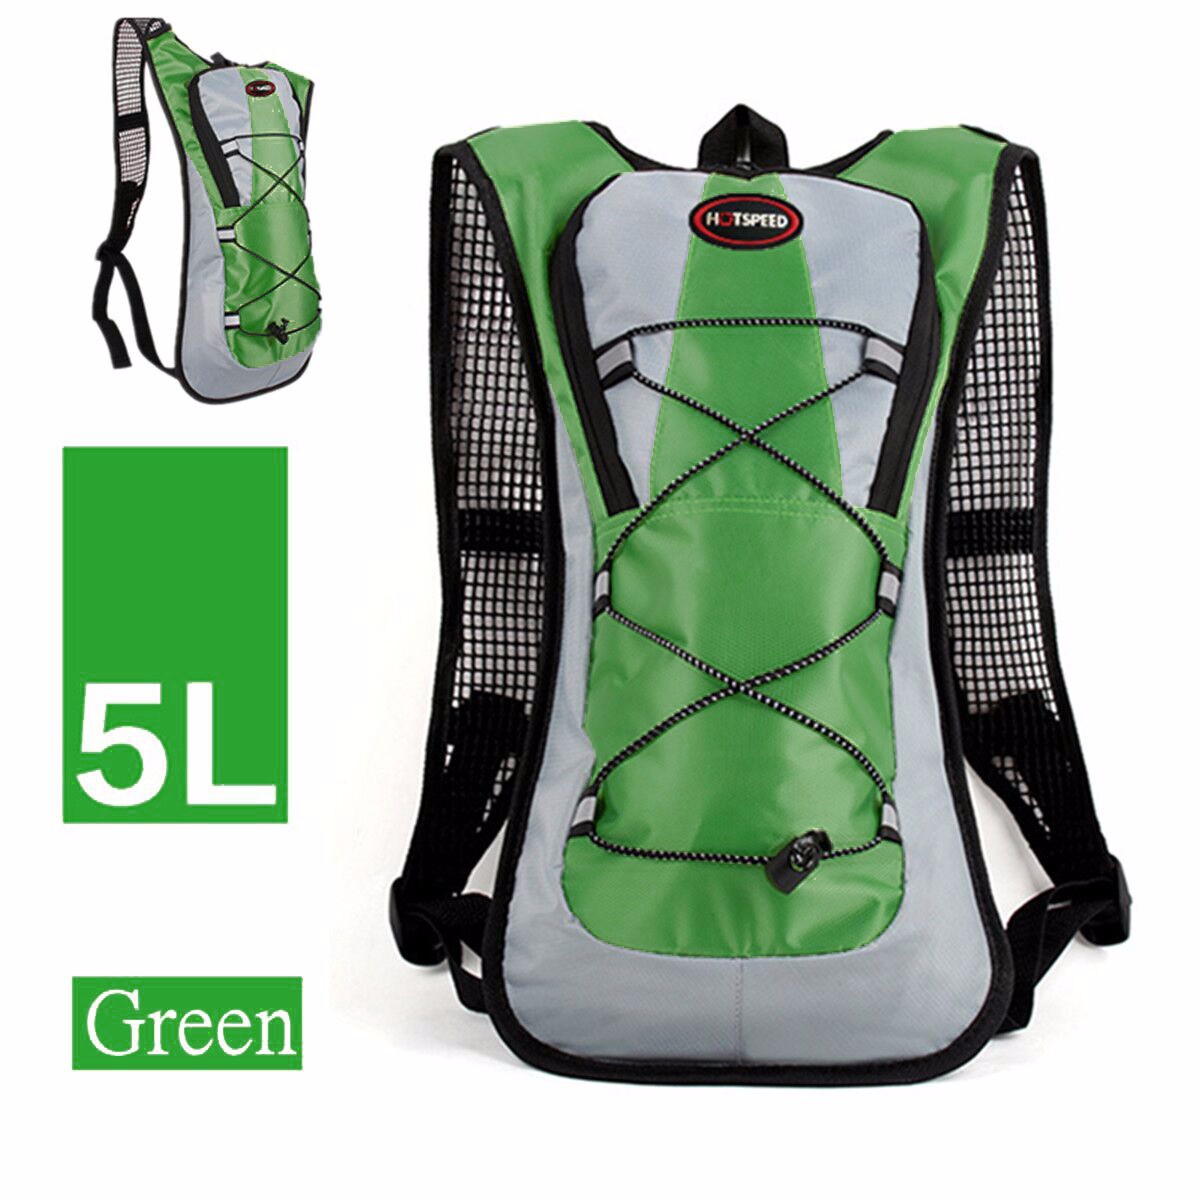 IPRee-5L-Running-Hydration-Backpack-Rucksack-2L-Straw-Water-Bladder-Bag-For-Hiking-Climbing-1126379-6